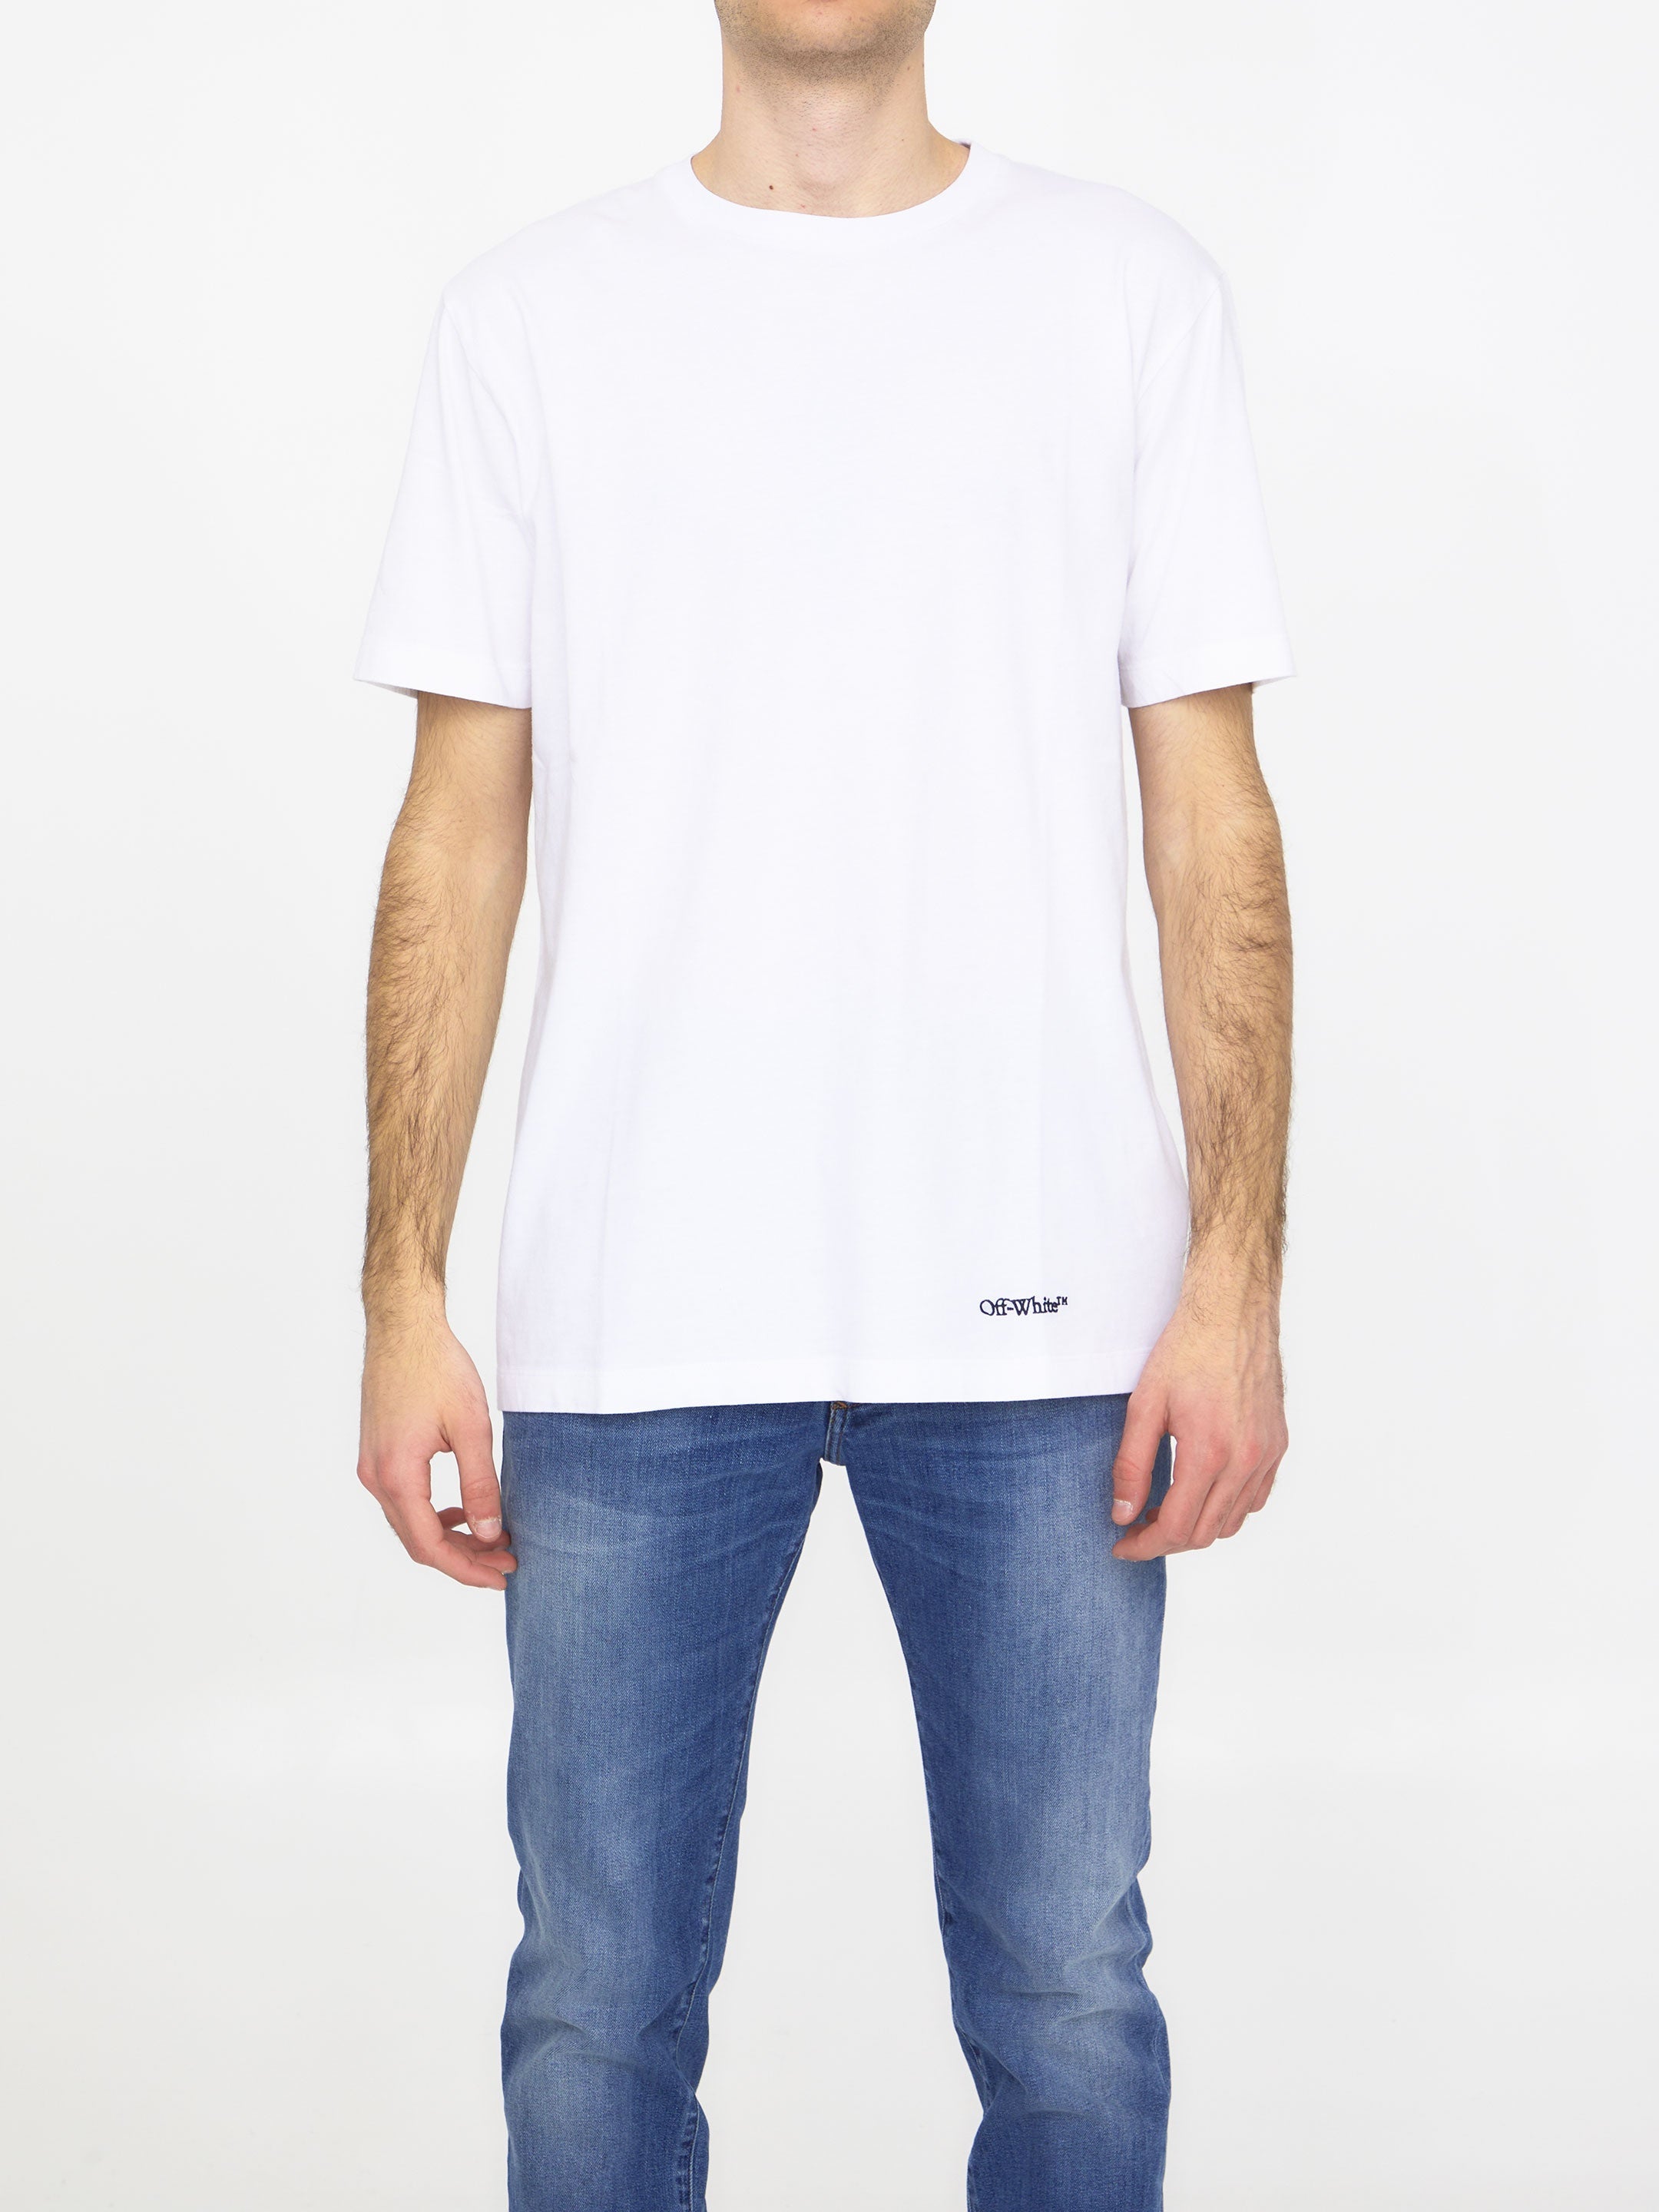 OFF-WHITE-OUTLET-SALE-Scribble-Diagonal-t-shirt-Shirts-S-WHITE-ARCHIVE-COLLECTION.jpg